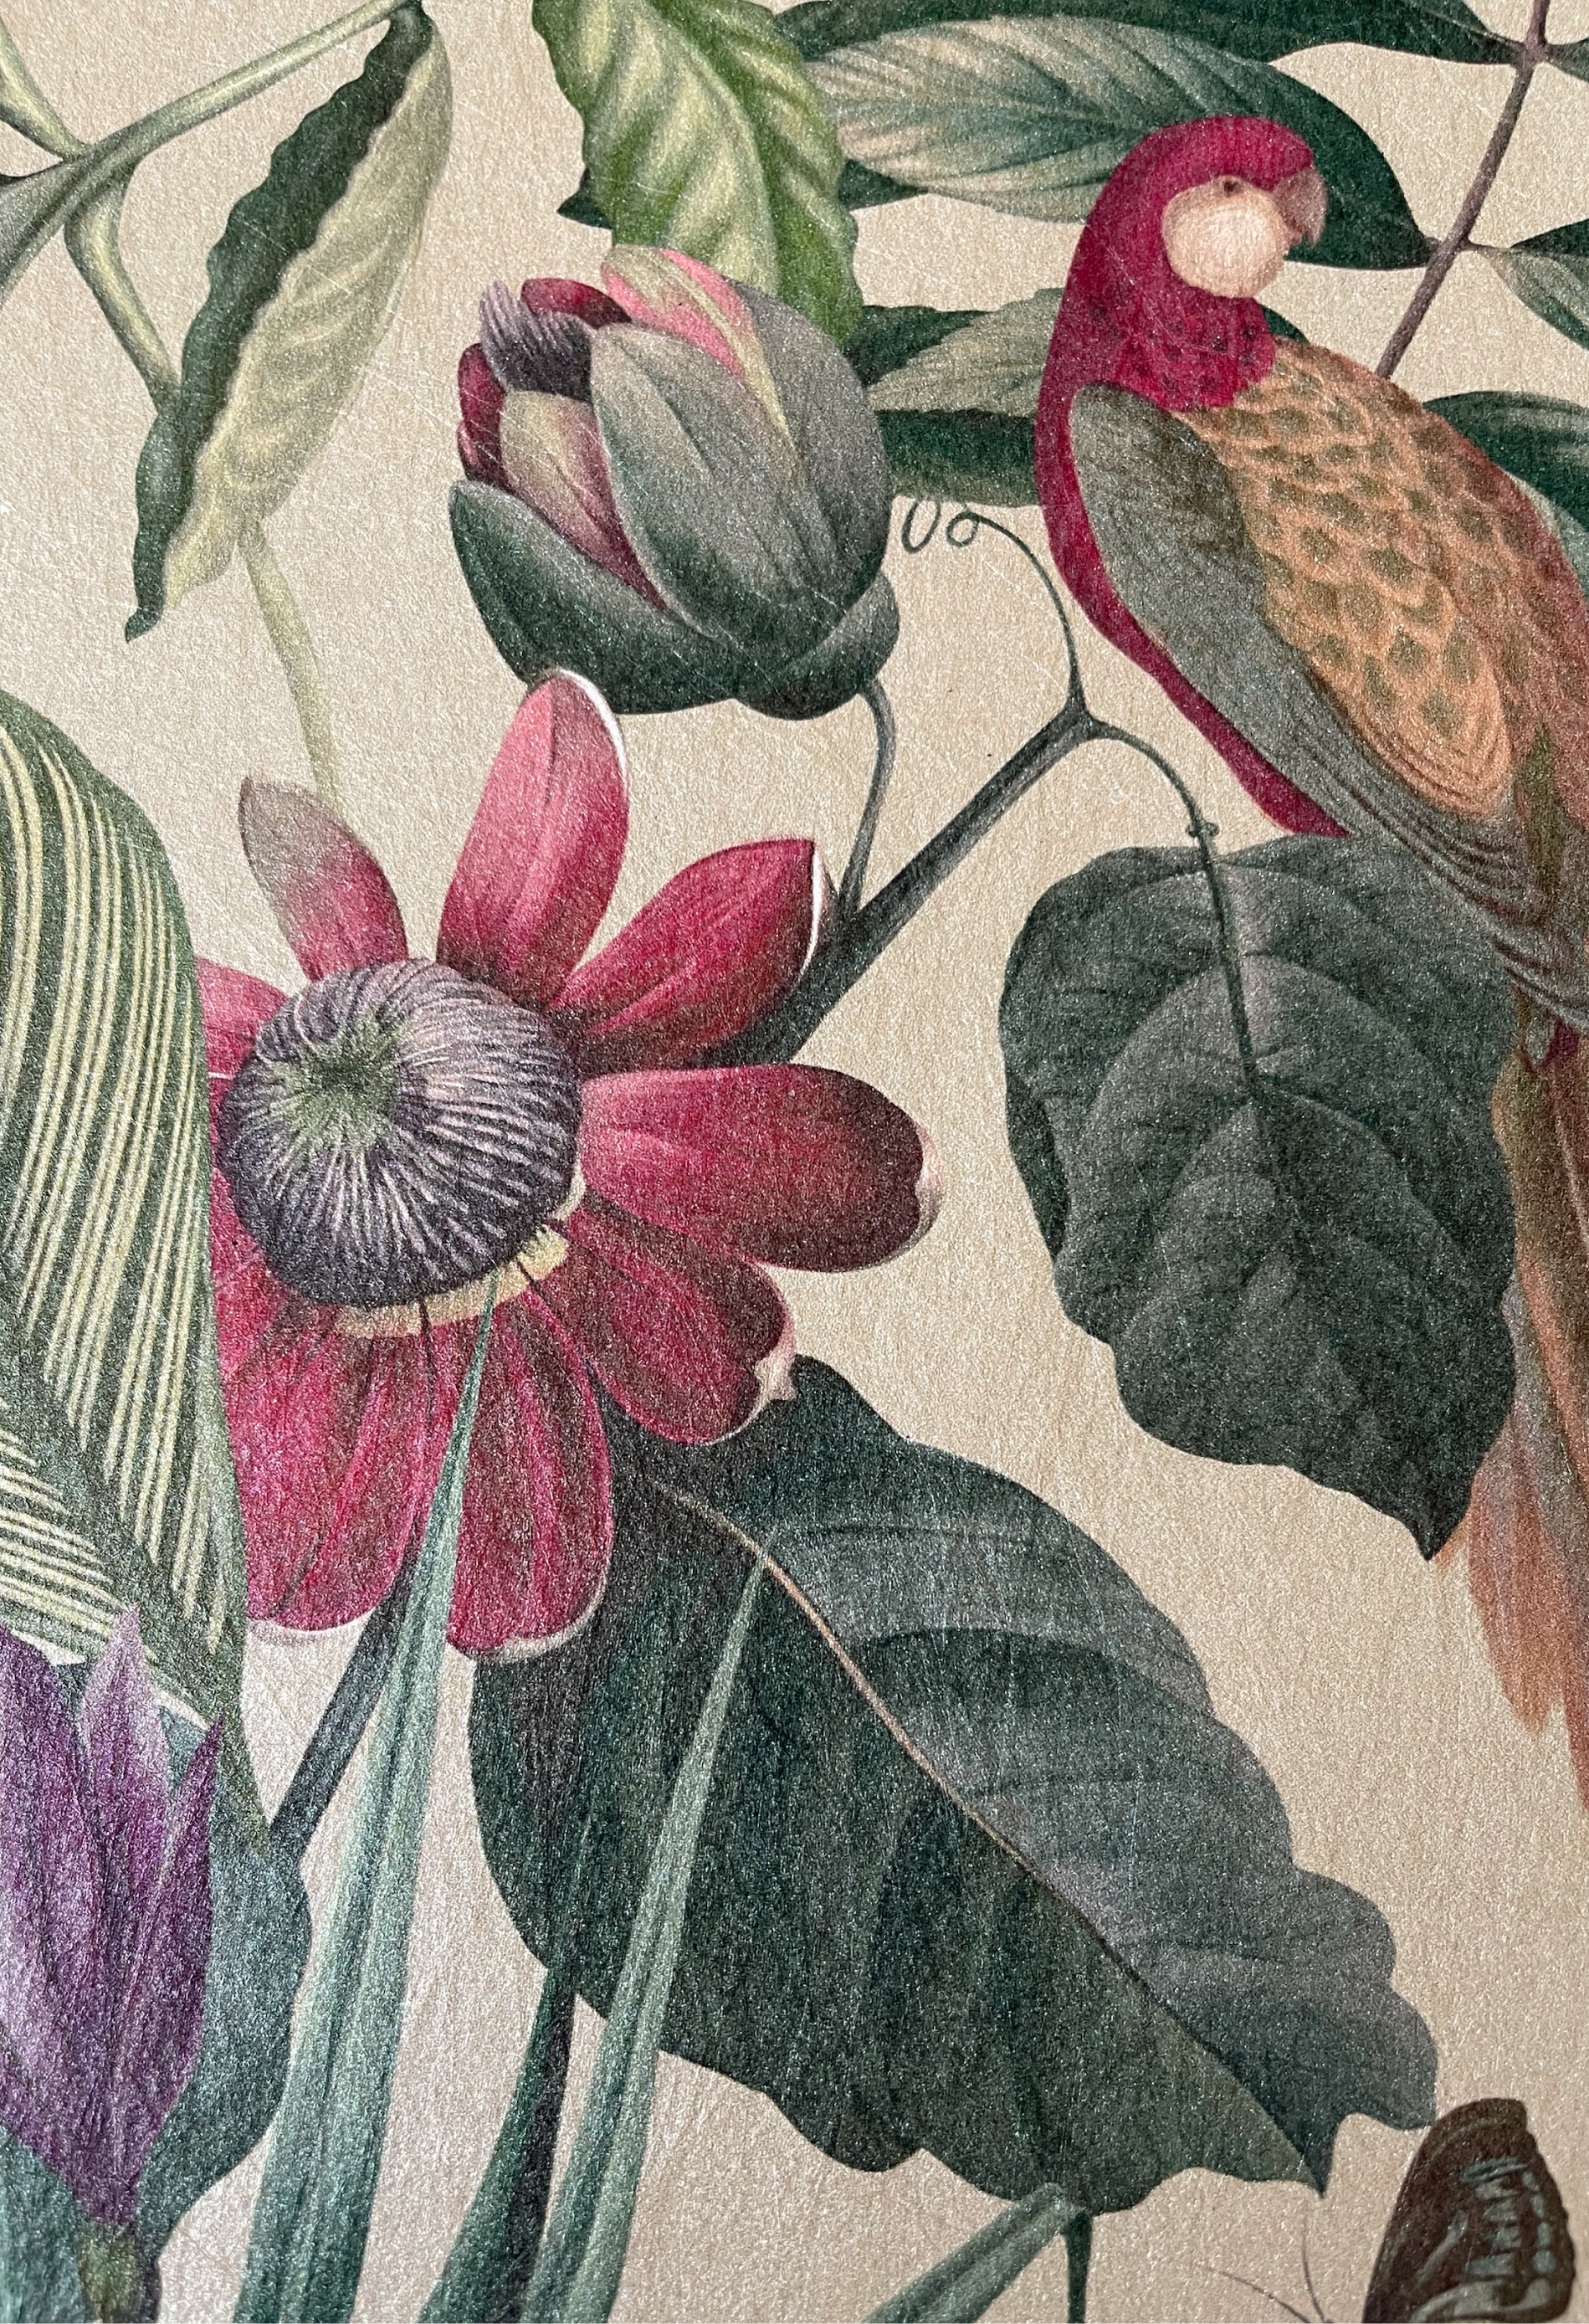 Close up of tropical bird with passion flower and leaves from Deus ex Gardenia's Passiflora in Antique on textured paper.